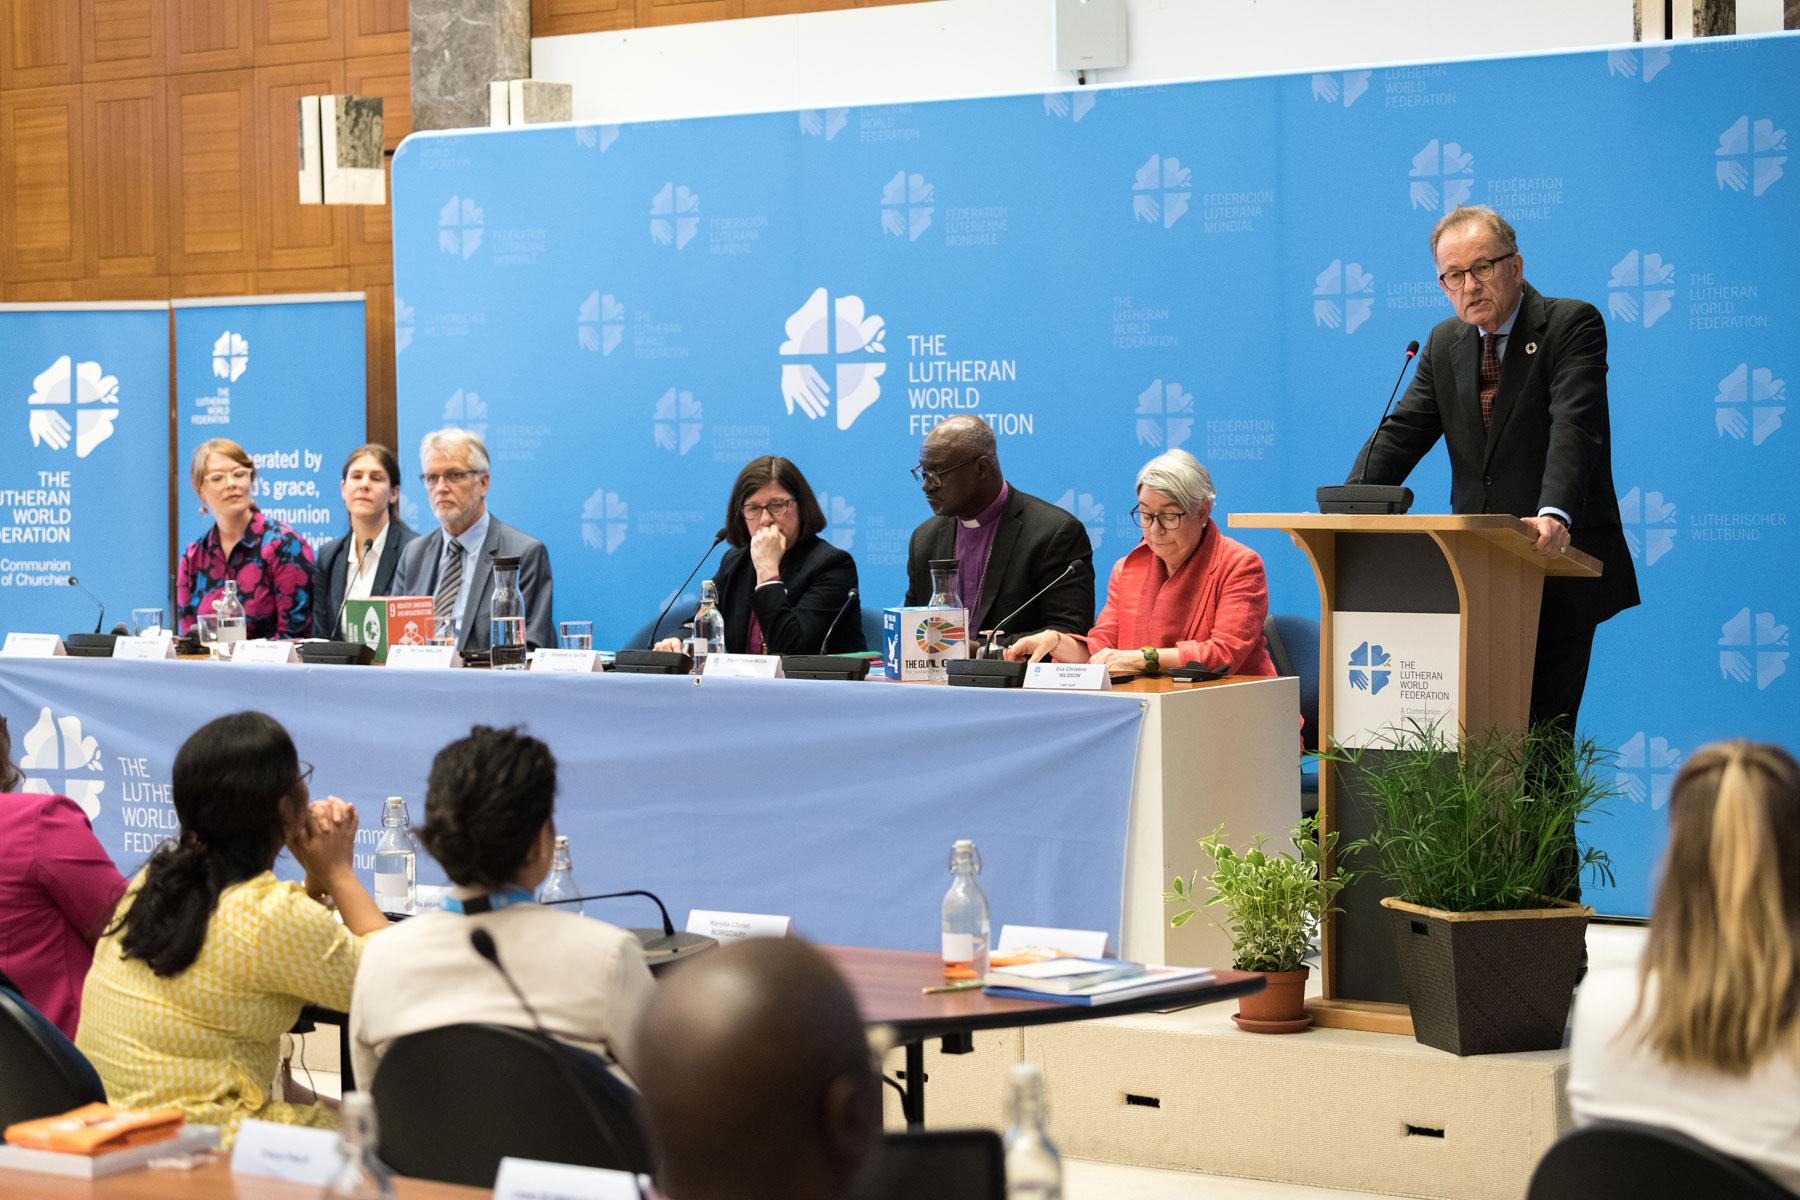 Director General of the United Nations Office at Geneva, Michael MÃ¸ller addresses the launch of the Waking the Giant self-assessment tool on 17 June. Photo: LWF/A.Hillert